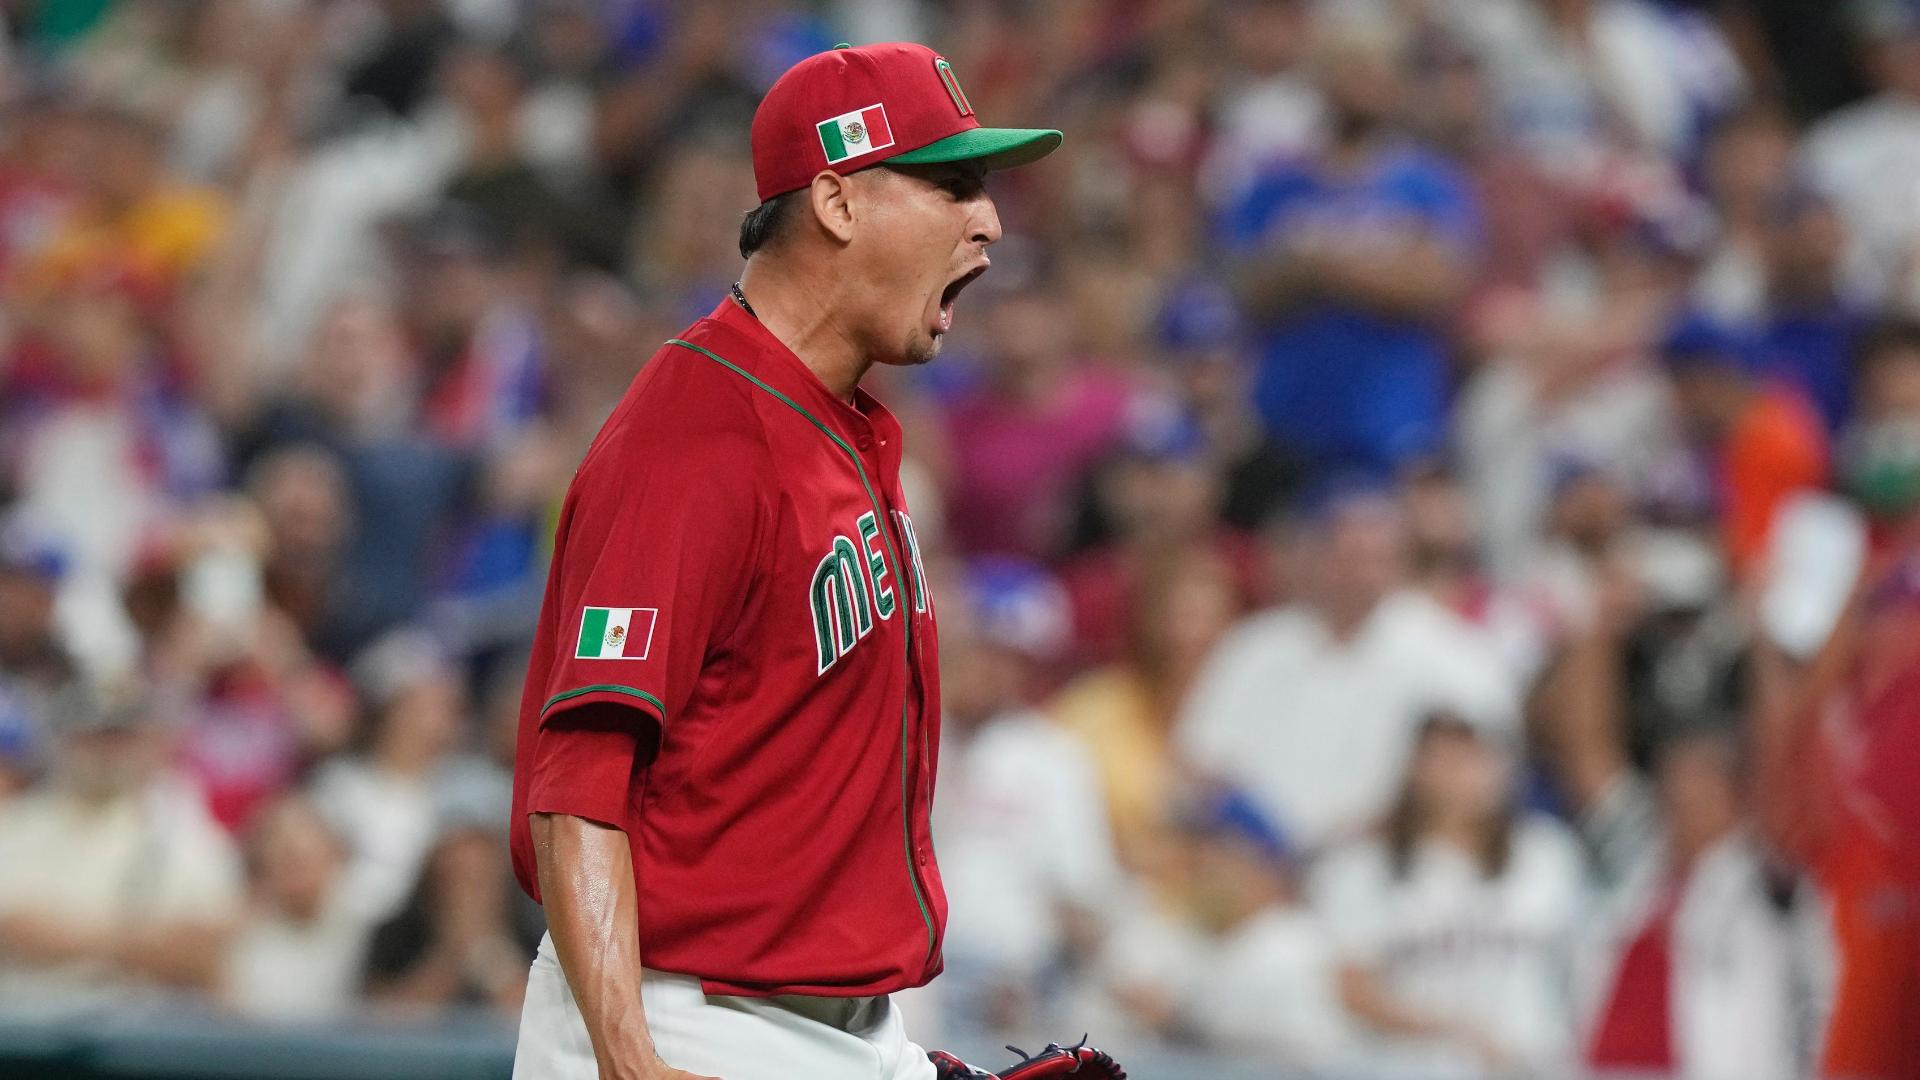 Isaac Paredes after Team Mexico's win to advance to WBC semifinals, Mexico,  Tampa Bay Rays, World Baseball Classic